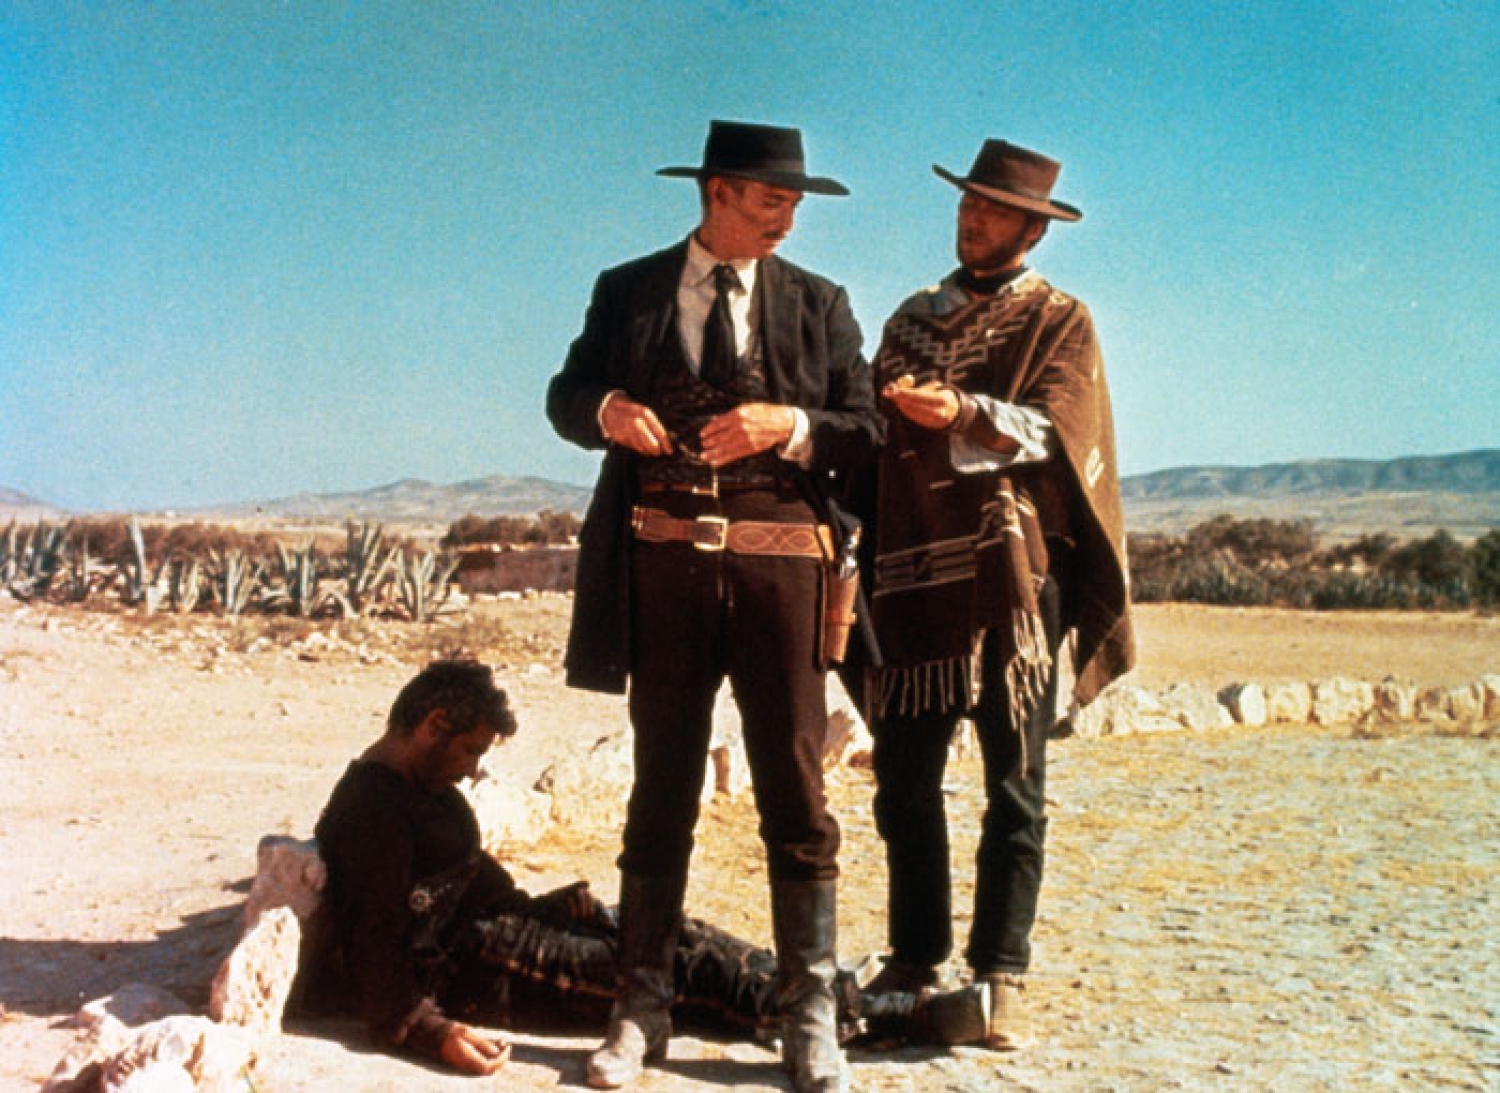 For A Few Dollars More #9